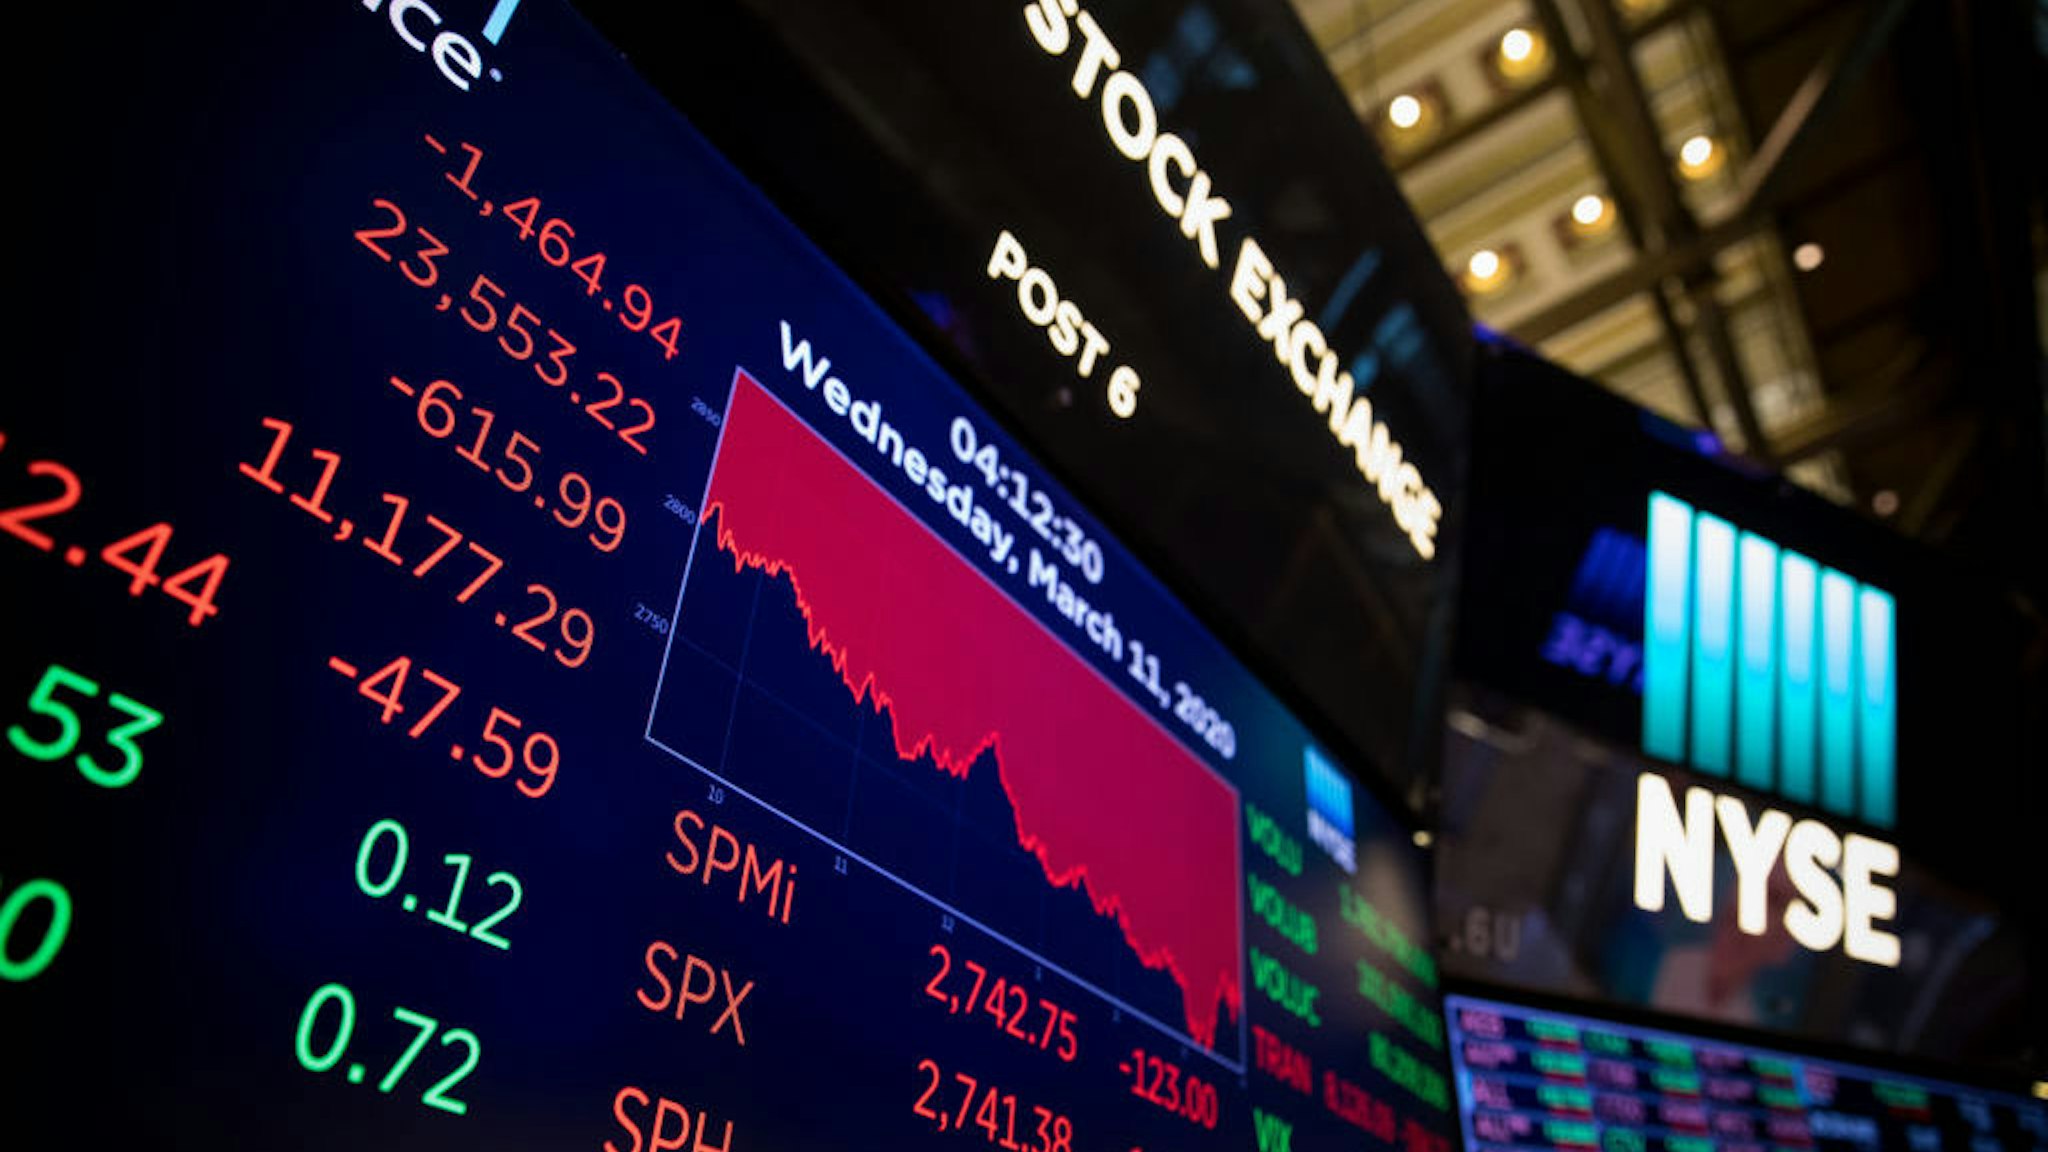 Screens show trading data at the New York Stock Exchange in New York, the United States, on March 11, 2020. The Dow Jones Industrial Average sank 1,464.94 points, or 5.86 percent, to 23,553.22. The 30-stock index fell into a bear market territory, down more than 20 percent from last month's record close. The S&amp;P 500 decreased 140.85 points, or 4.89 percent, to finish at 2,741.38. The Nasdaq Composite Index dipped 392.20 points, or 4.70 percent, to 7,952.05. (Photo by Michael Nagle/Xinhua via Getty)